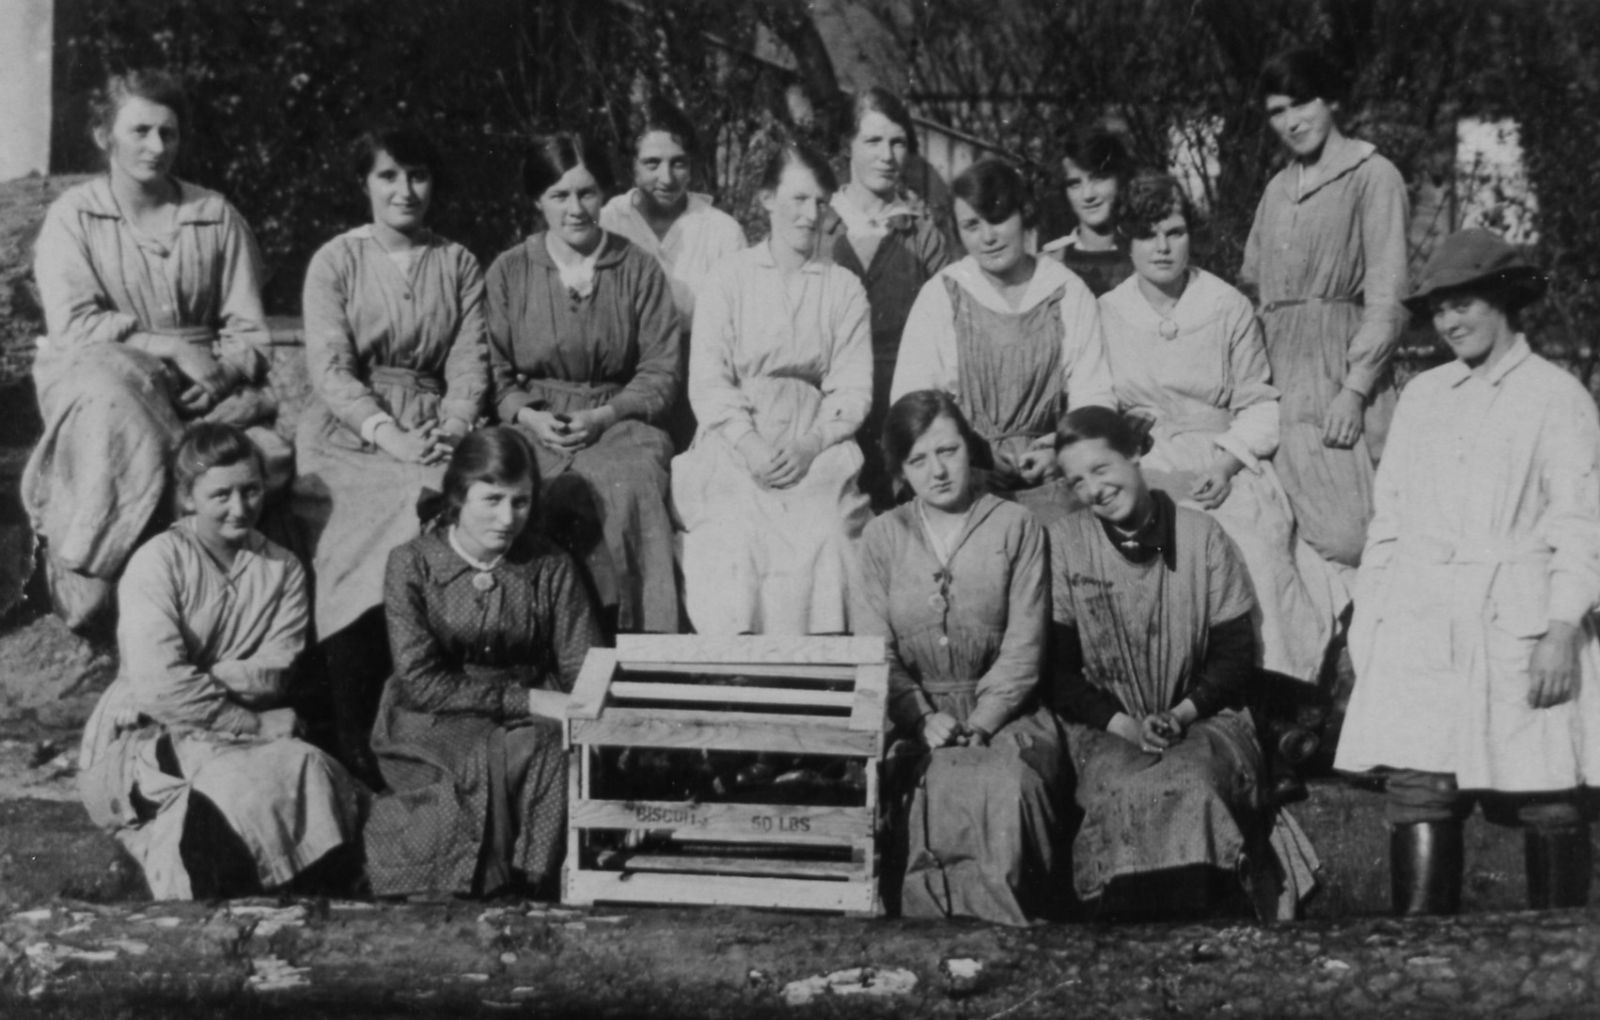 An old black and white image of a group of women from the hospital